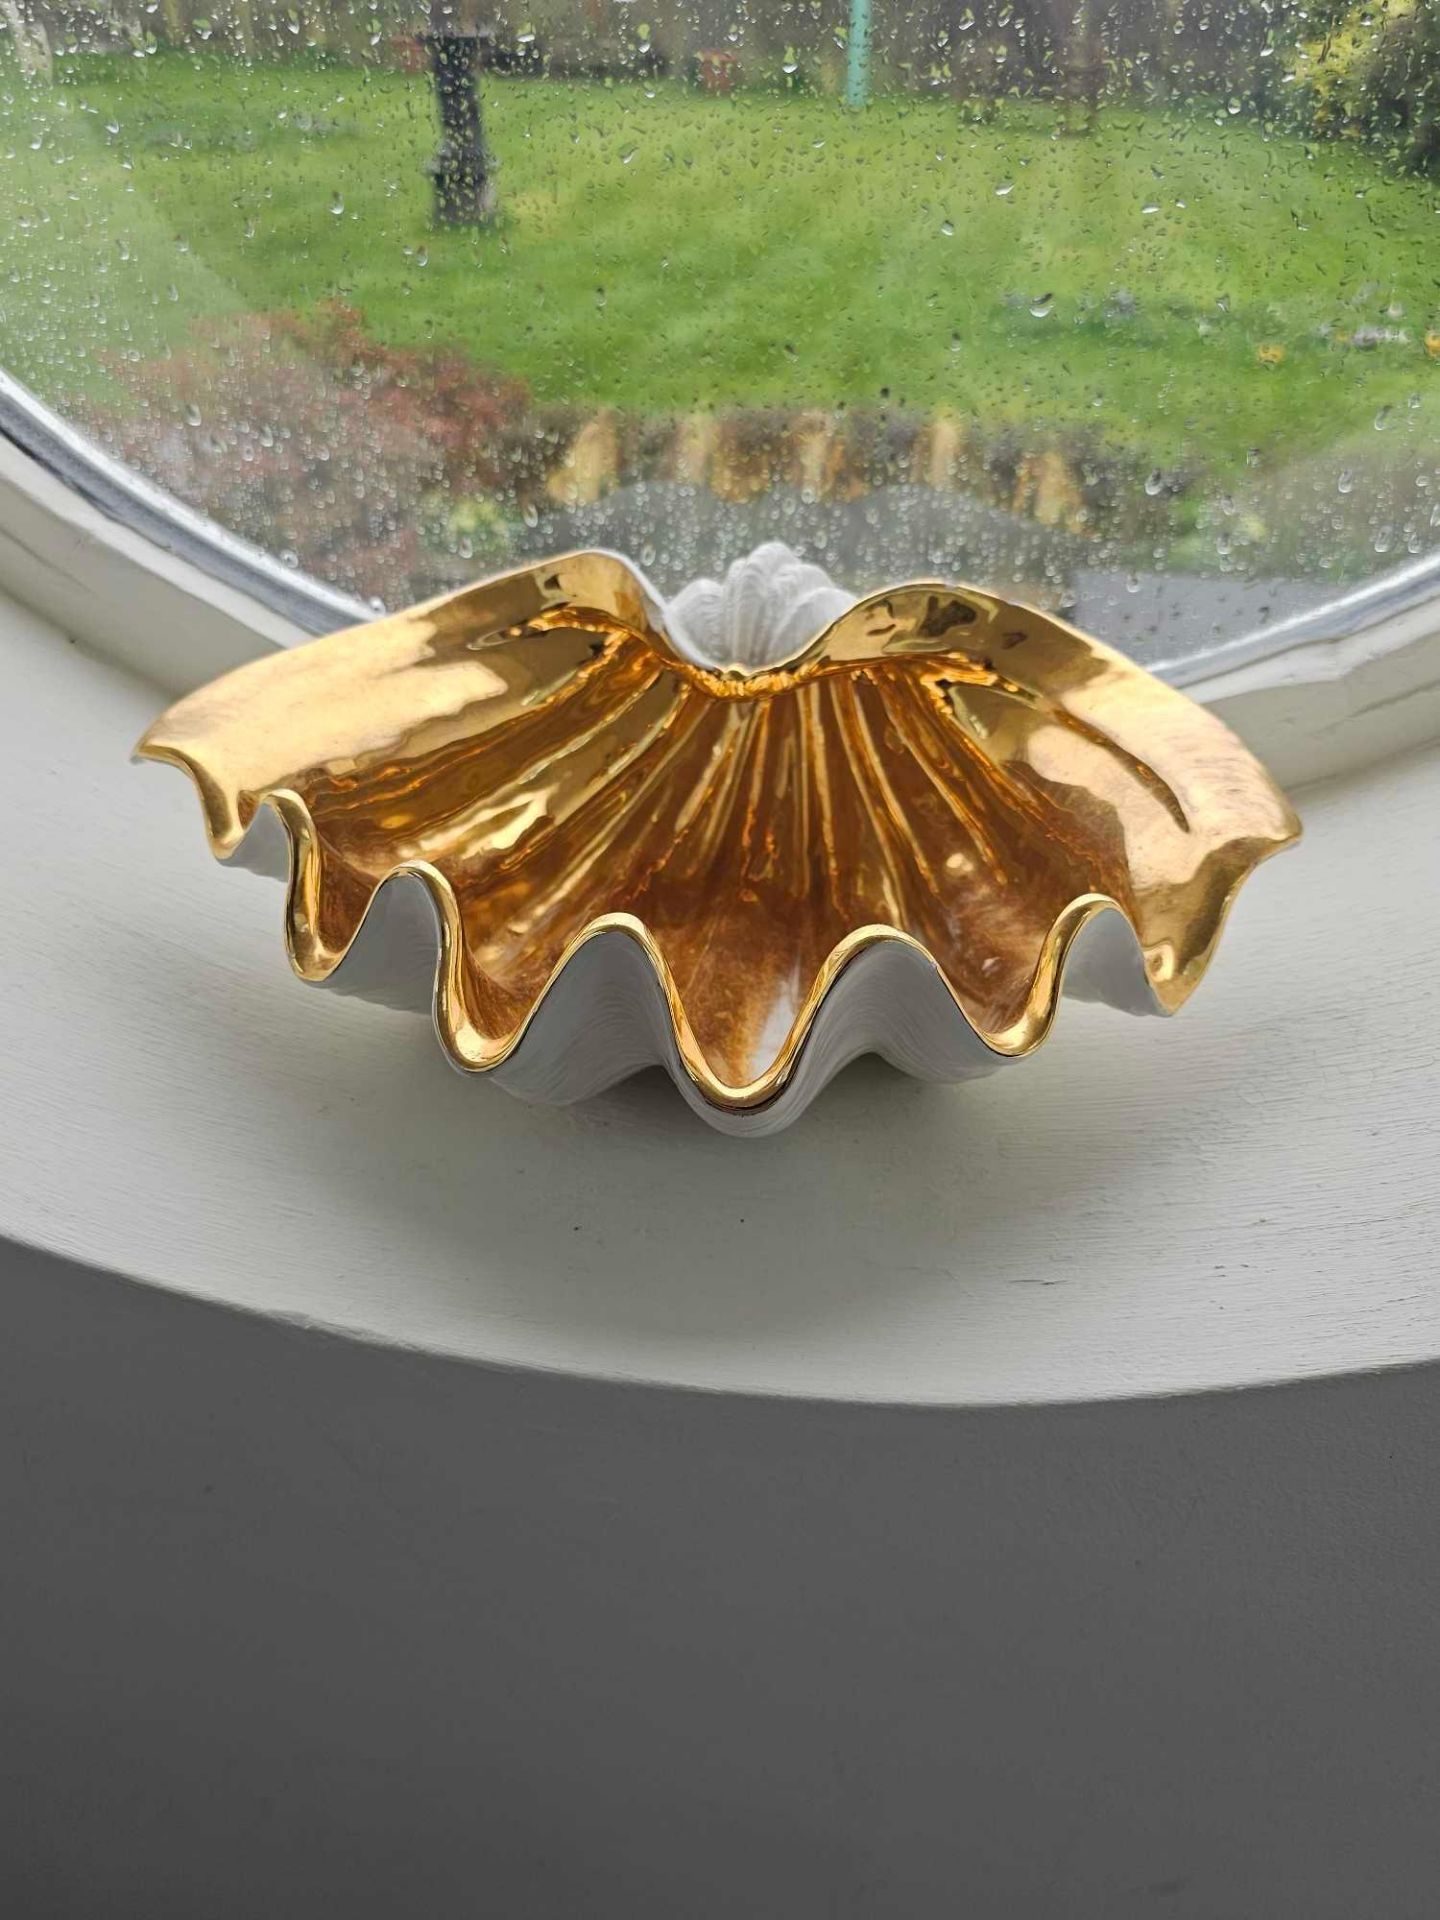 A Fine Porcelain Clam Neptune Decorative Objet Textured Finish And Gold Gilded